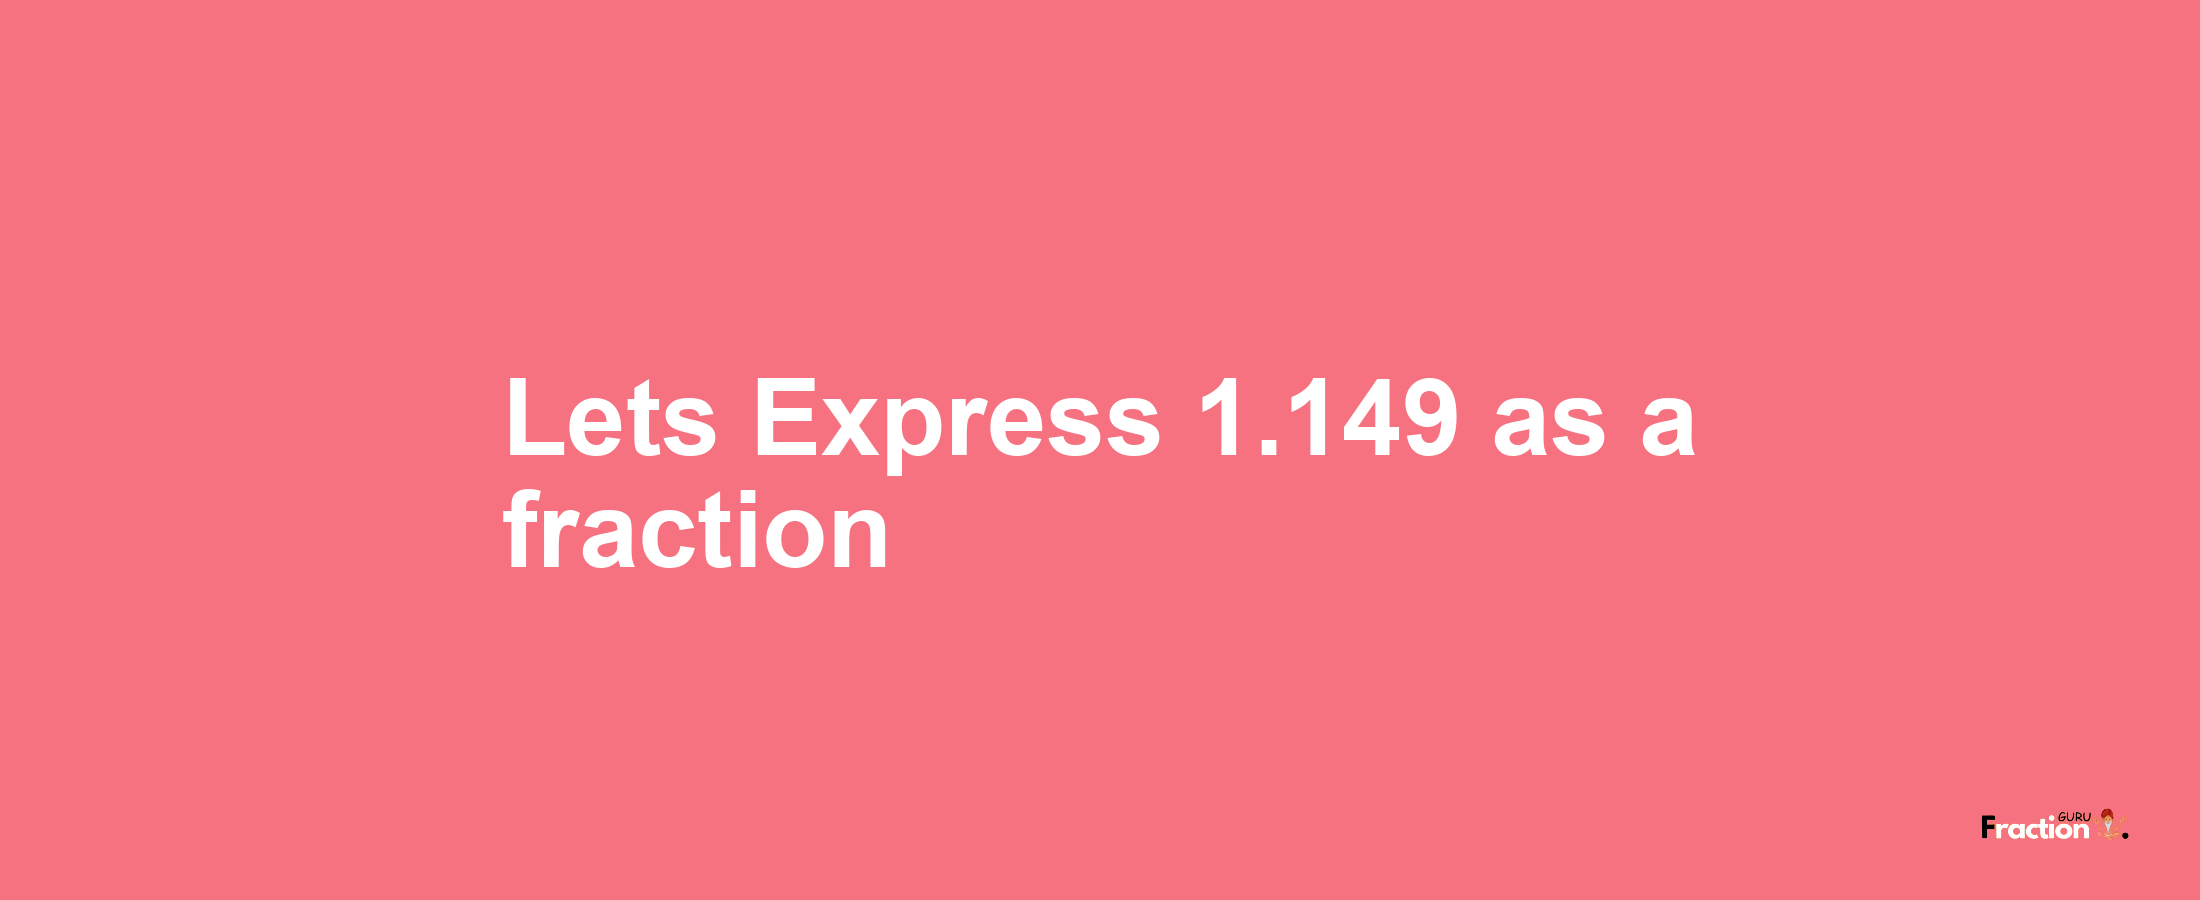 Lets Express 1.149 as afraction